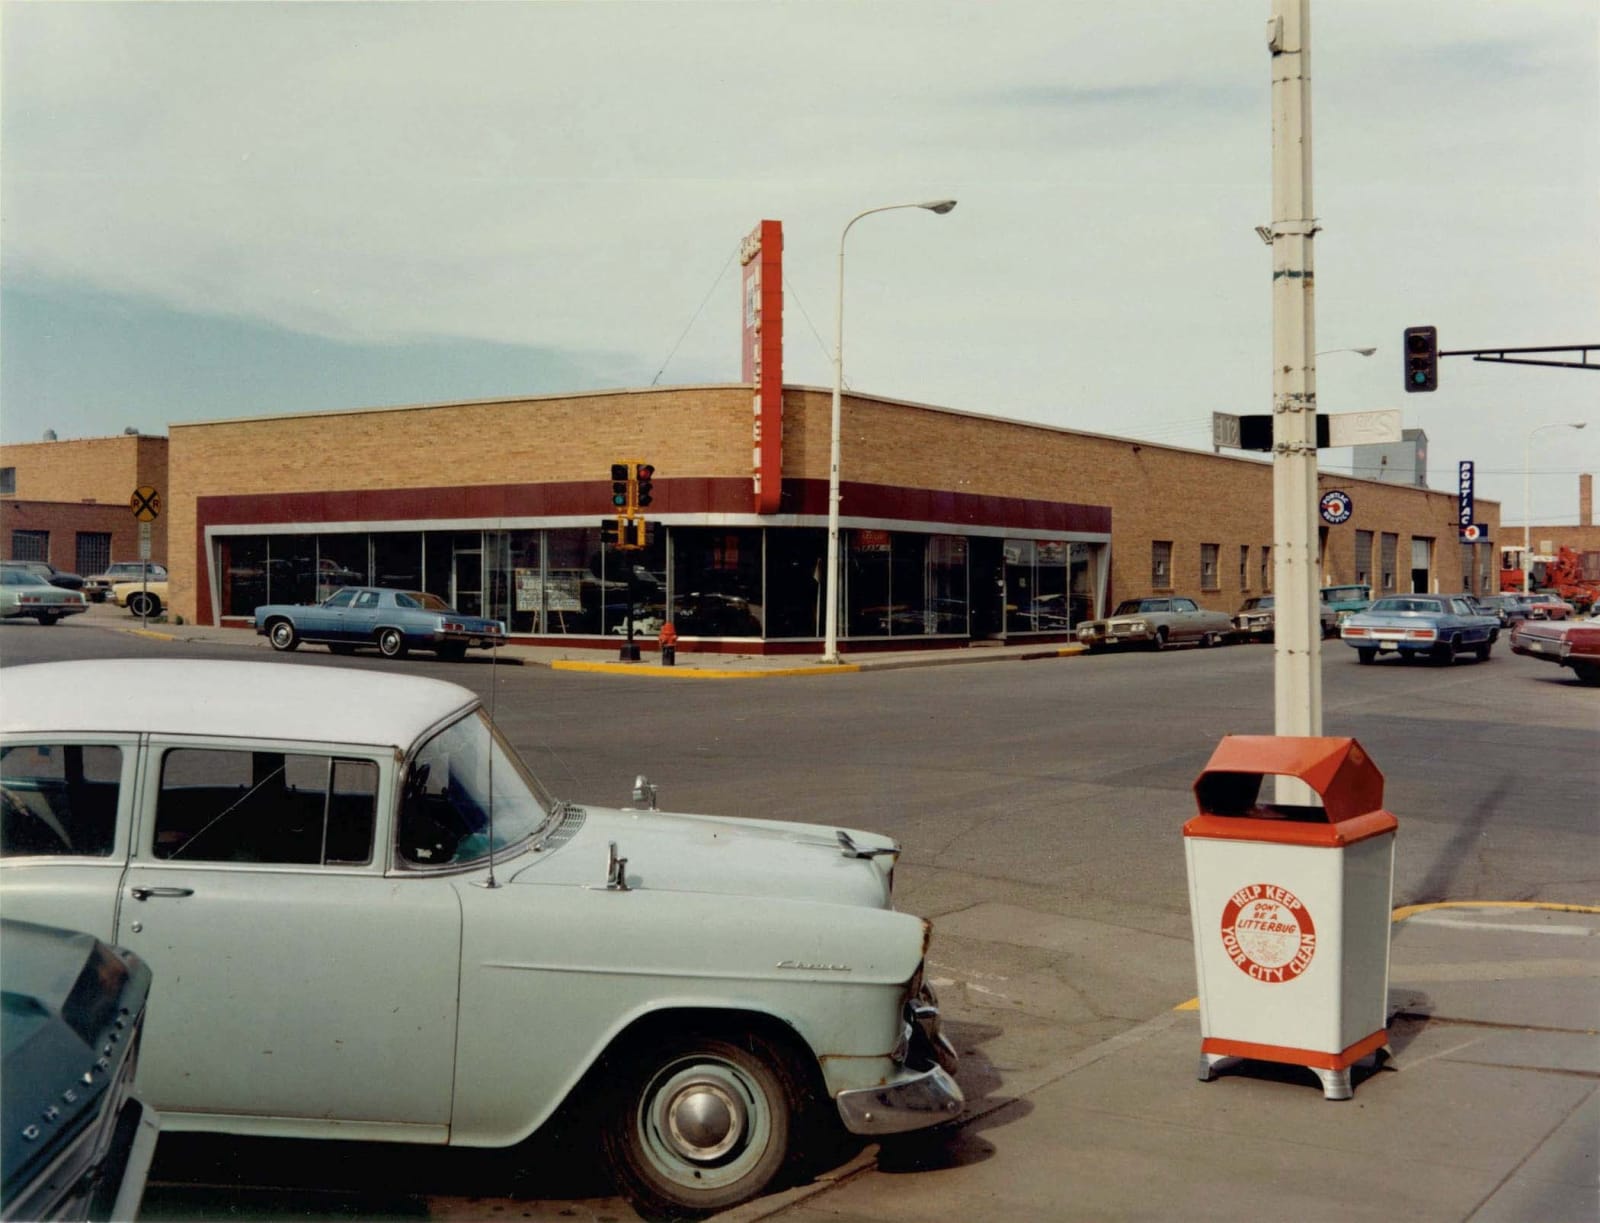 Stephen Shore, Intersection: Main Street and Second Avenue, Valley City, North Dakota, July 12, 1973